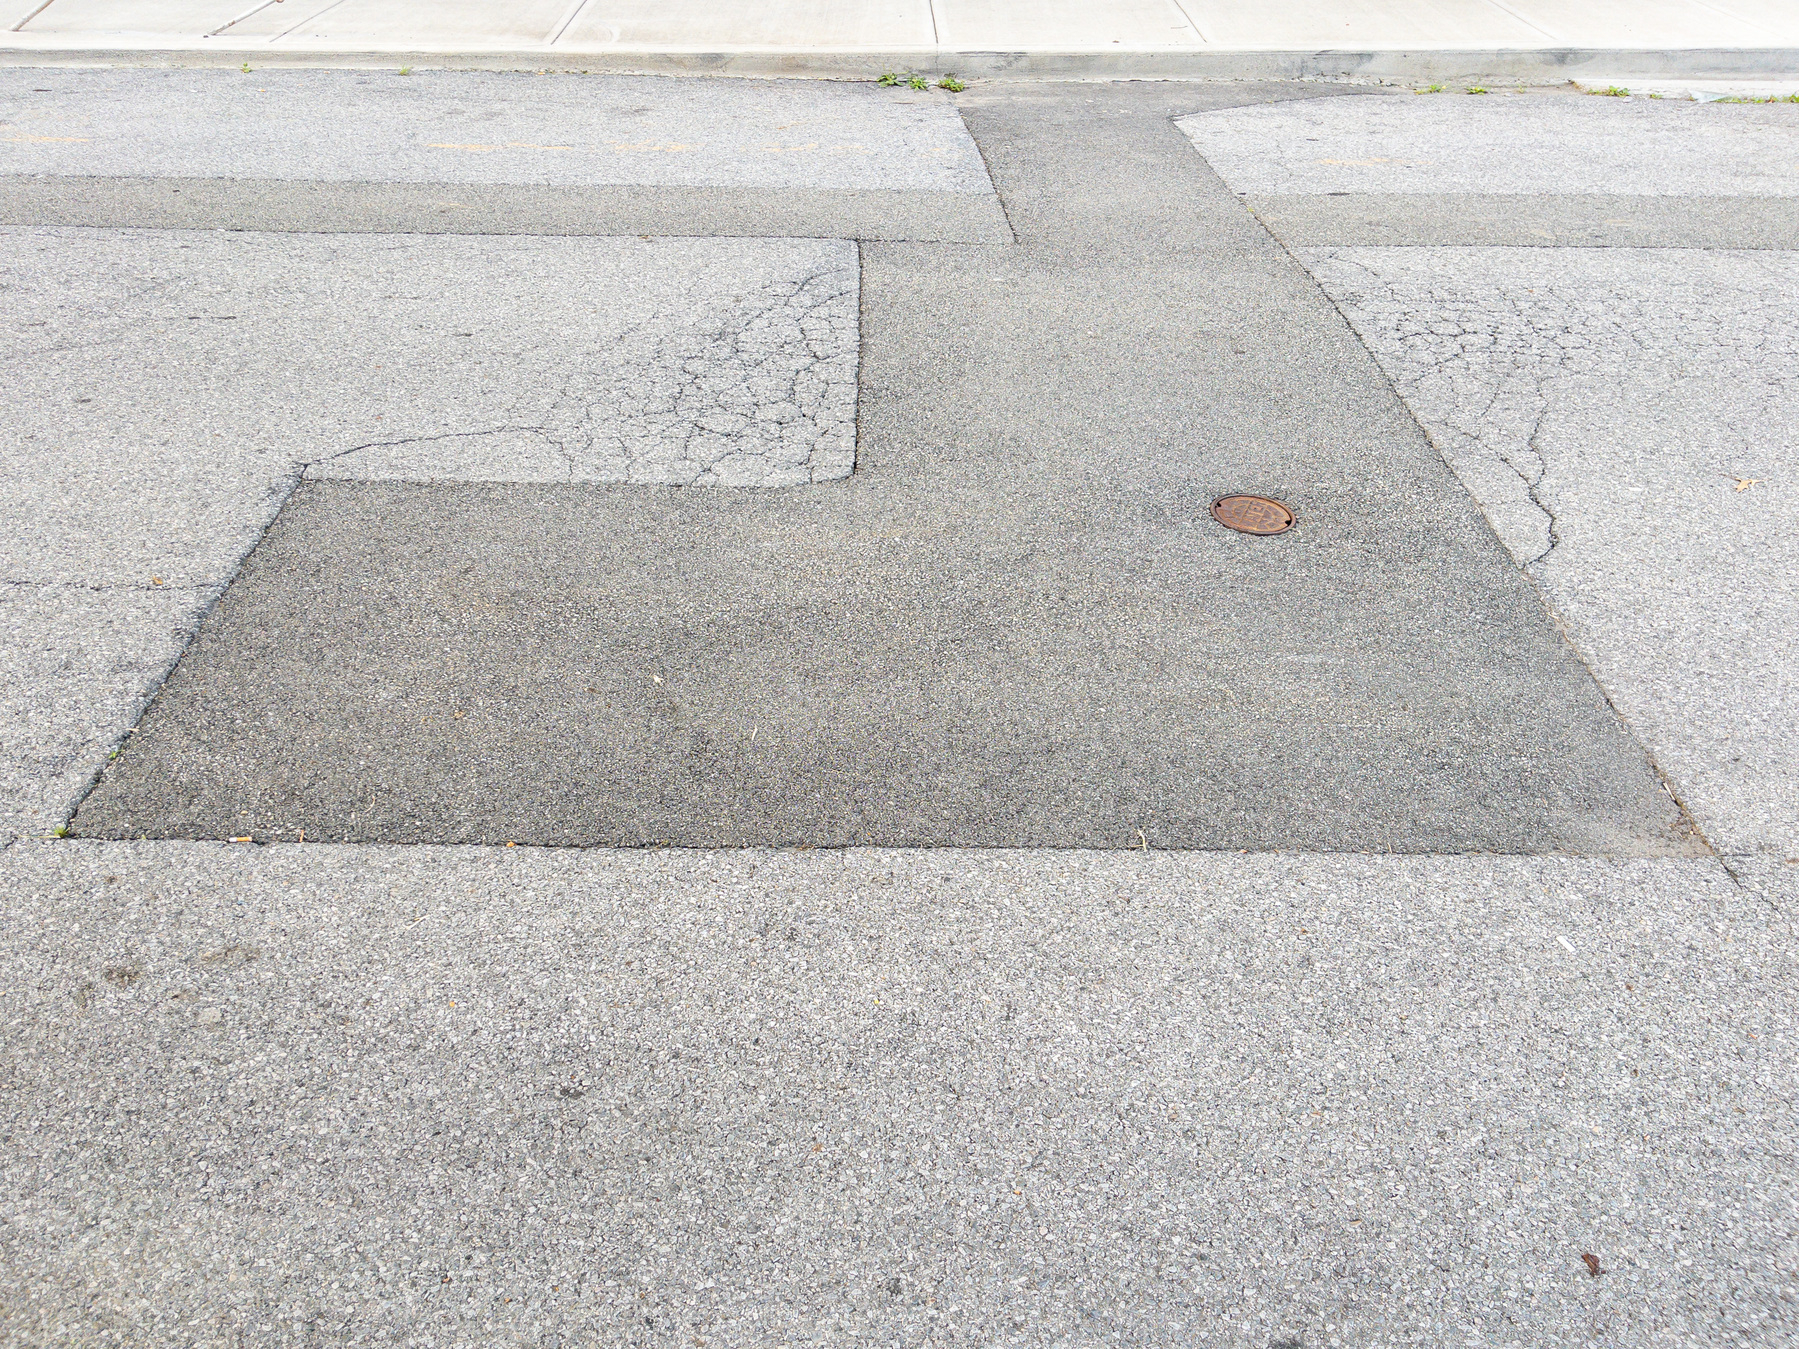 Rectilinear patching in asphalt street surface.